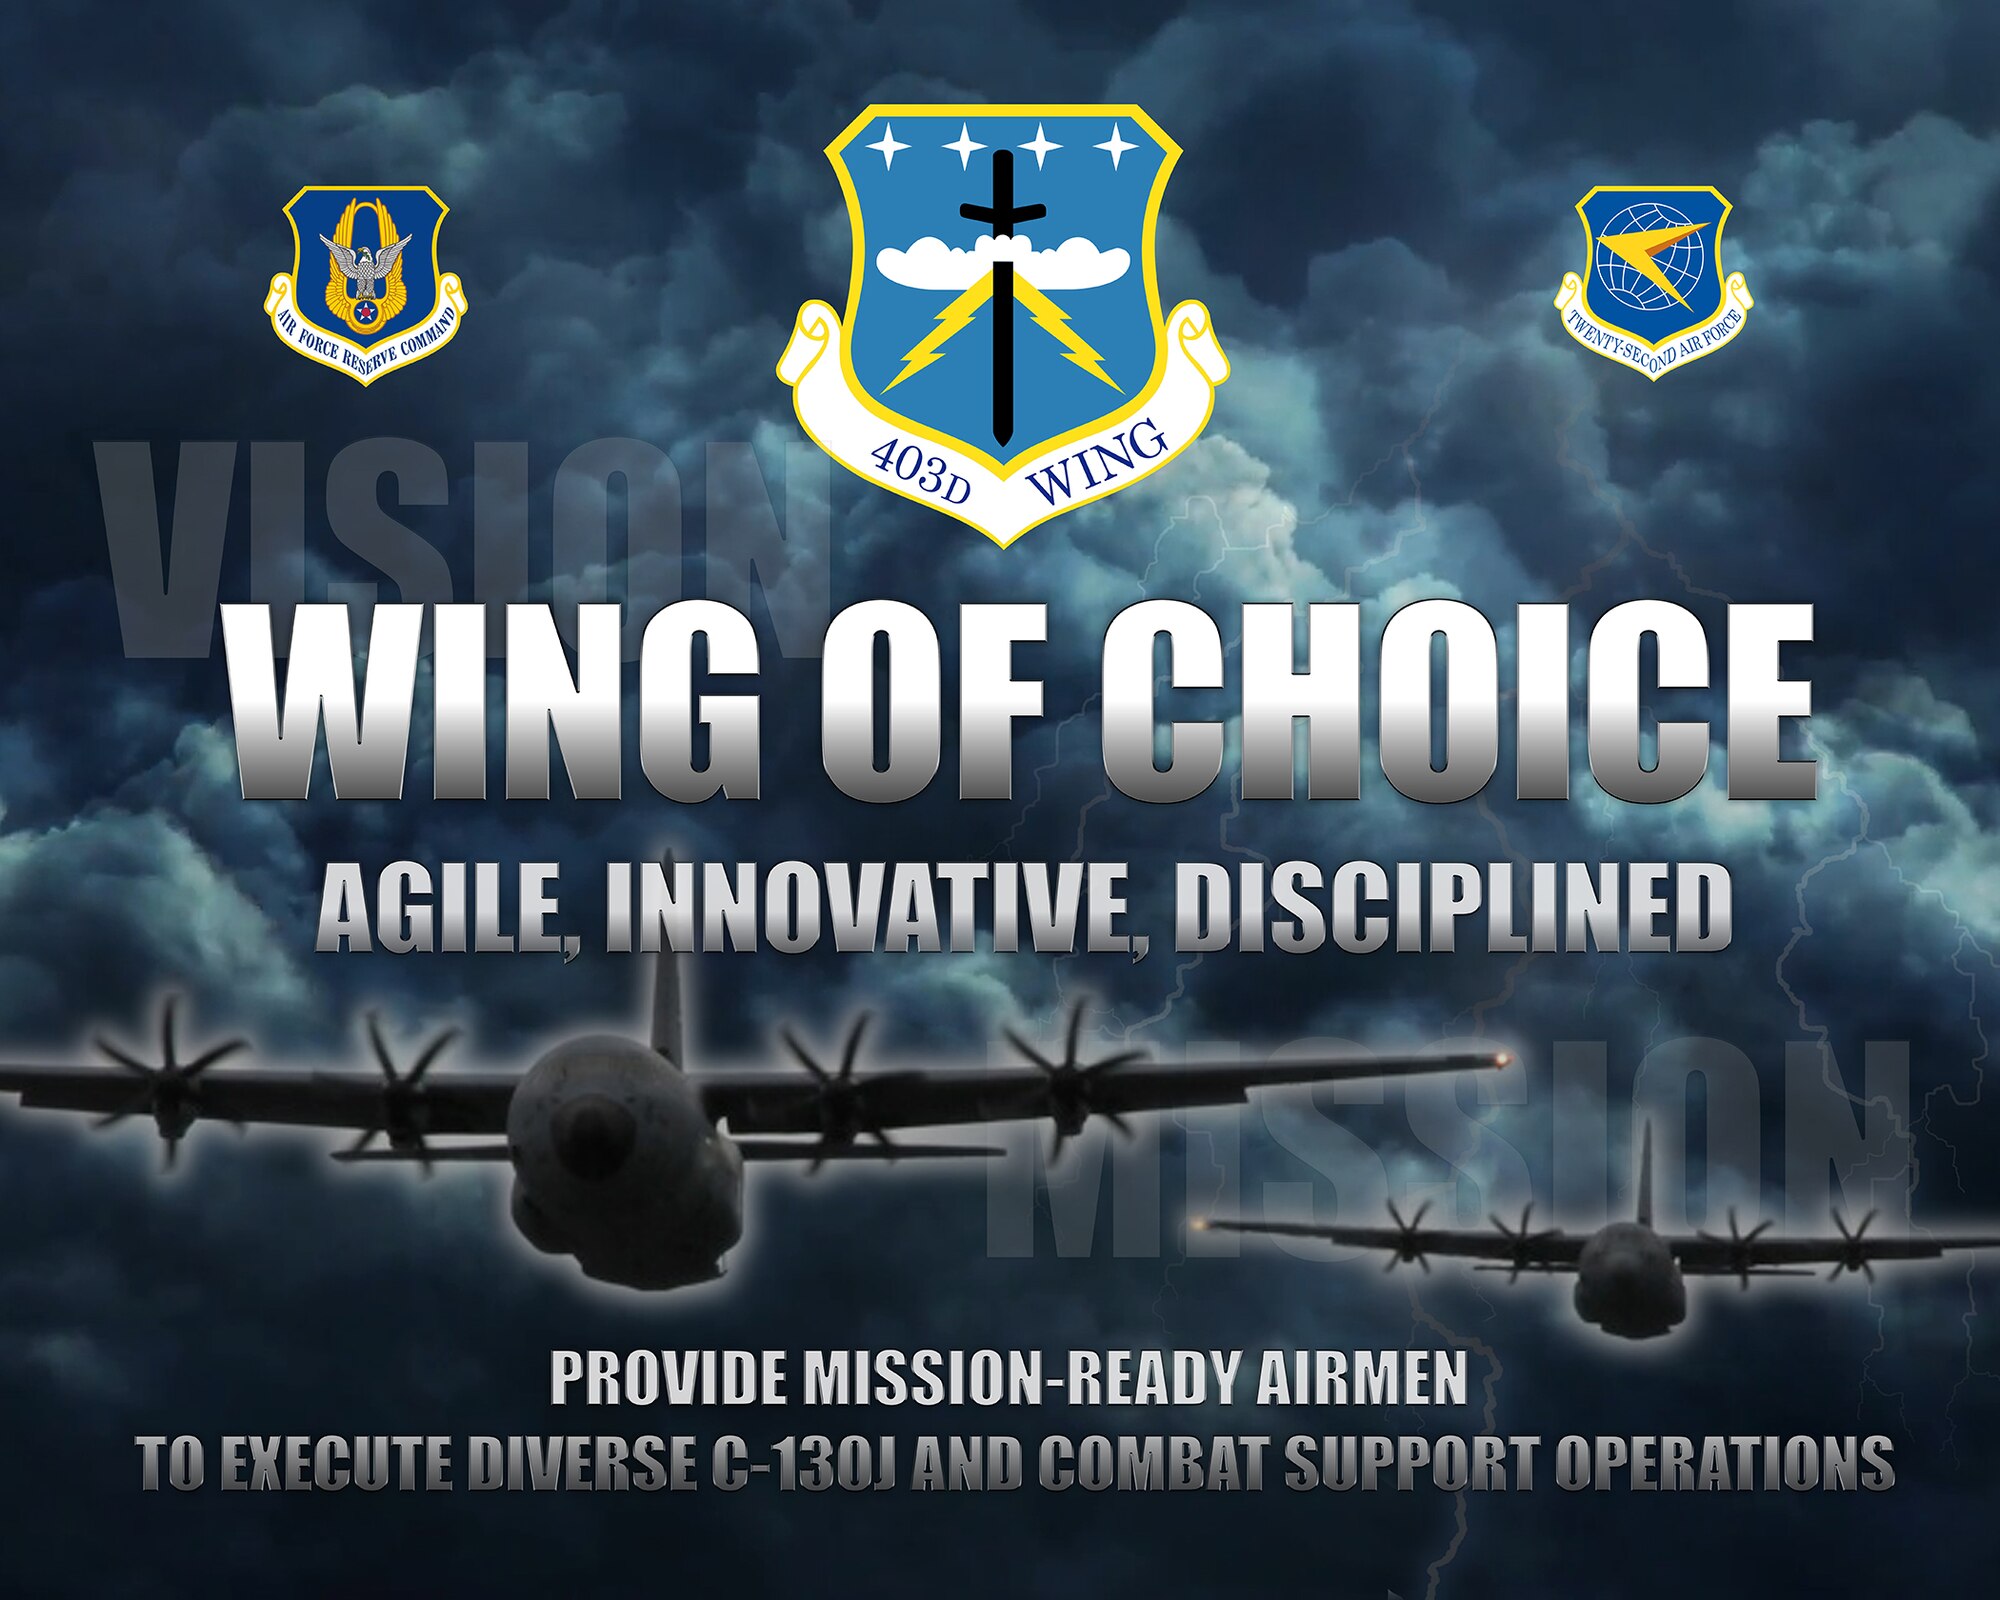 Graphic of 403rd Wing vision and mission